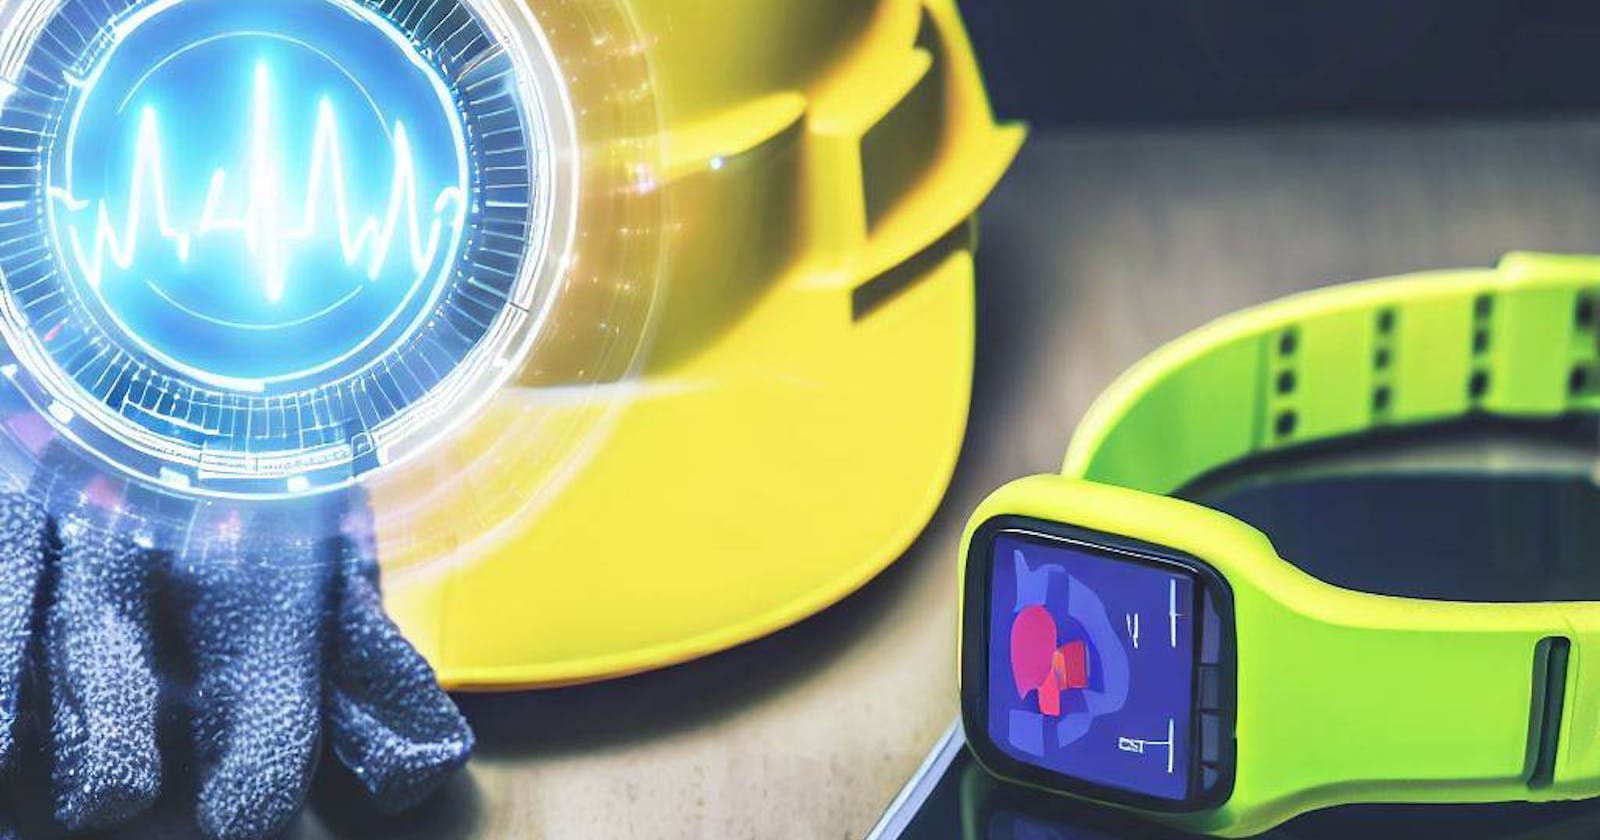 Role of Wearables in Occupational Health and Safety